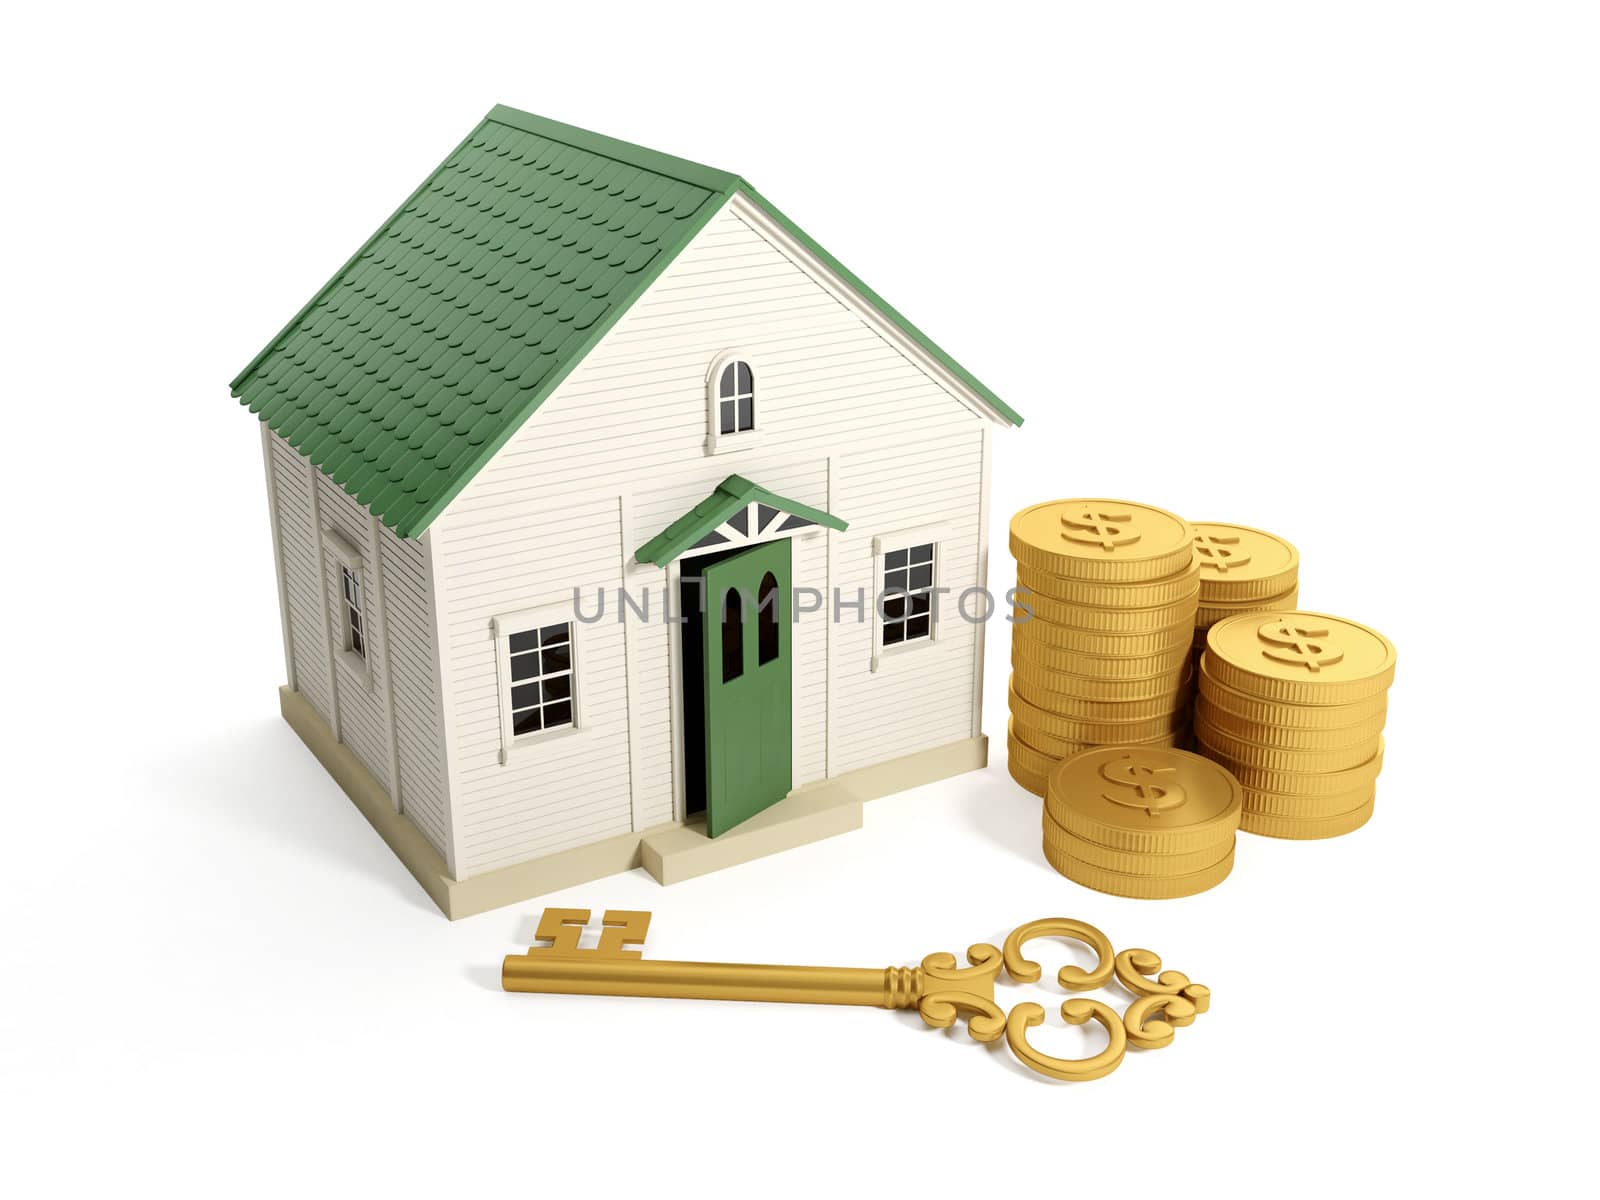 3d illustration: Buying a home, real estate loan. Toy house with a golden key and a group of gold coins